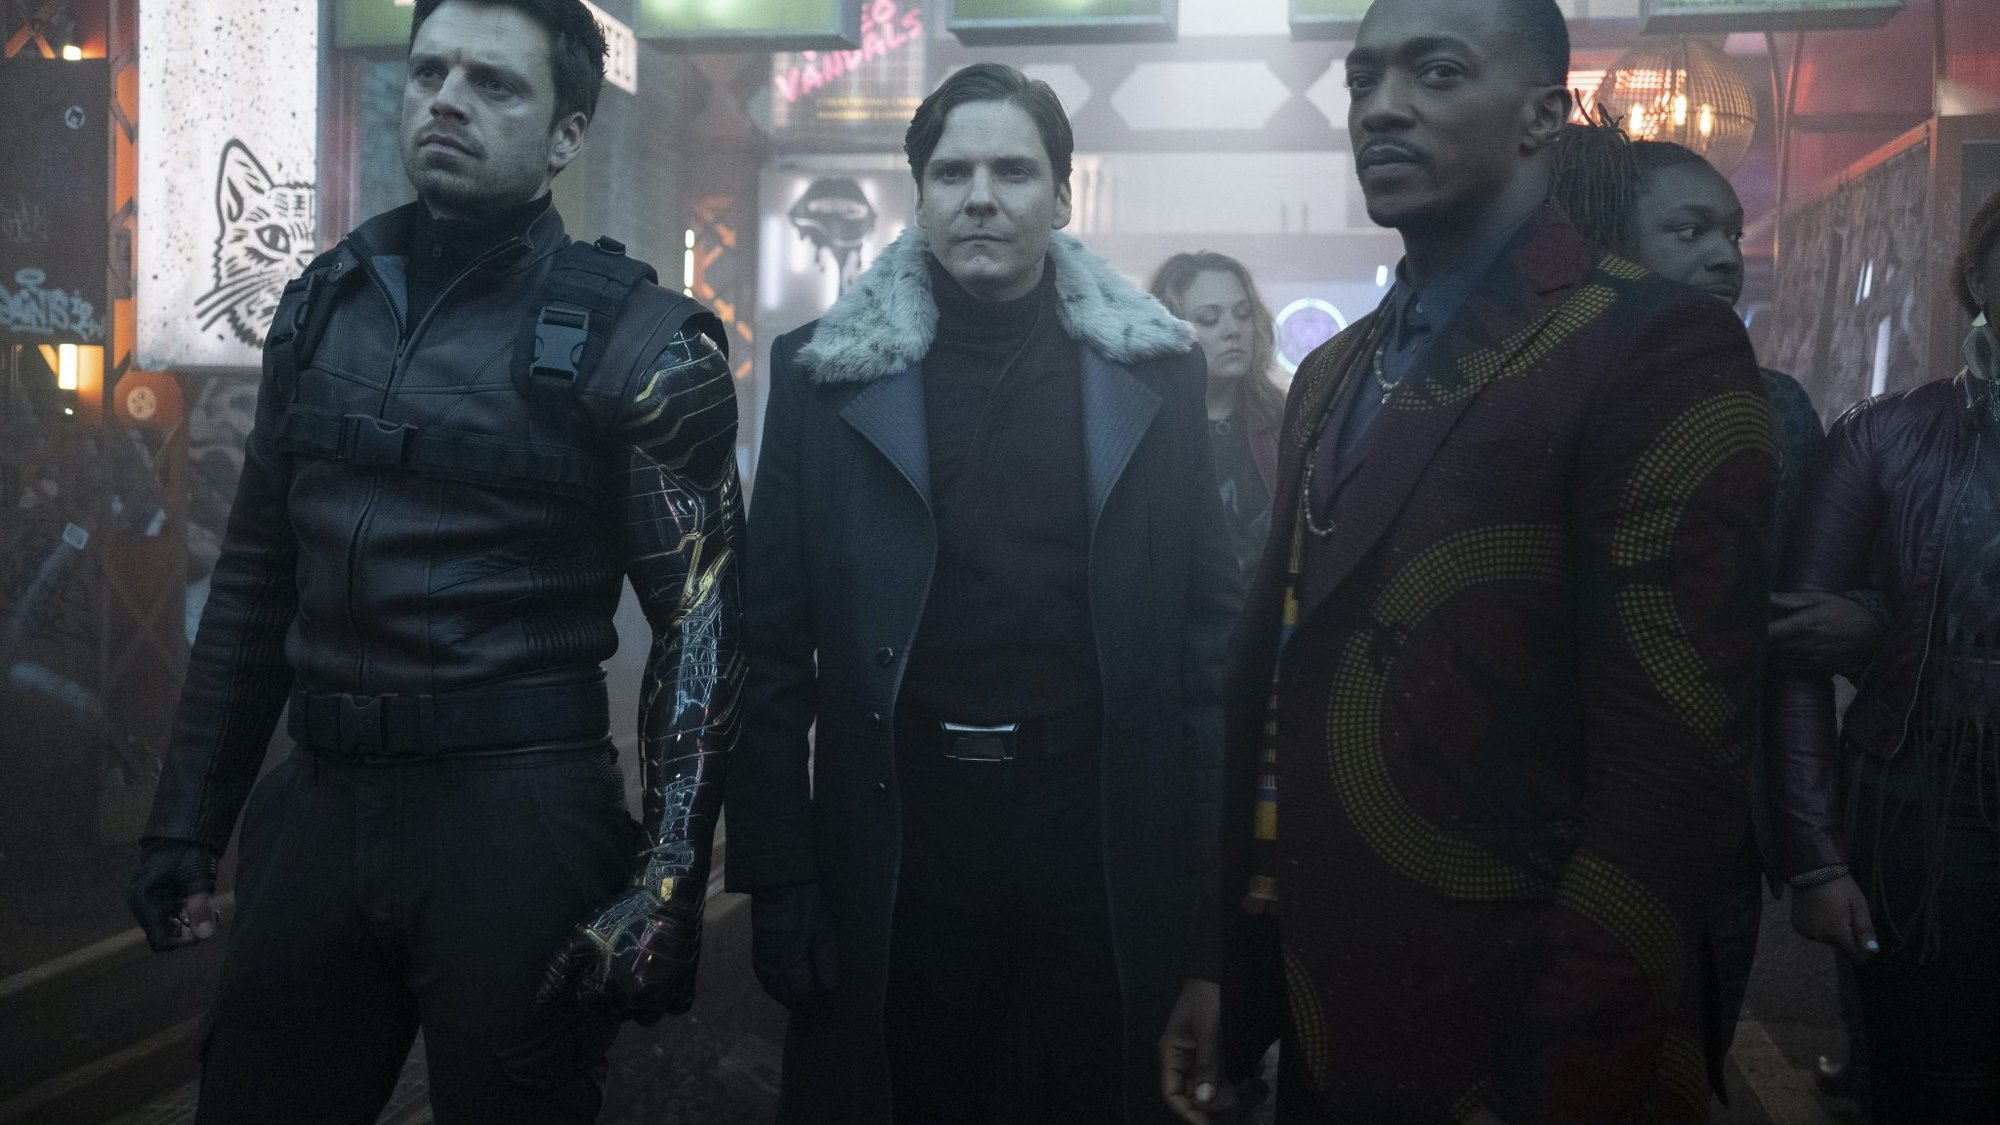 Winter Soldier/Bucky Barnes (Sebastian Stan), Zemo (Daniel Brühl) and Falcon/Sam Wilson (Anthony Mackie) in Marvel Studios’. THE FALCON AND THE WINTER SOLDIER exclusively on Disney+. Photo by Chuck Zlotnick. ©Marvel Studios 2021. All Rights Reserved.